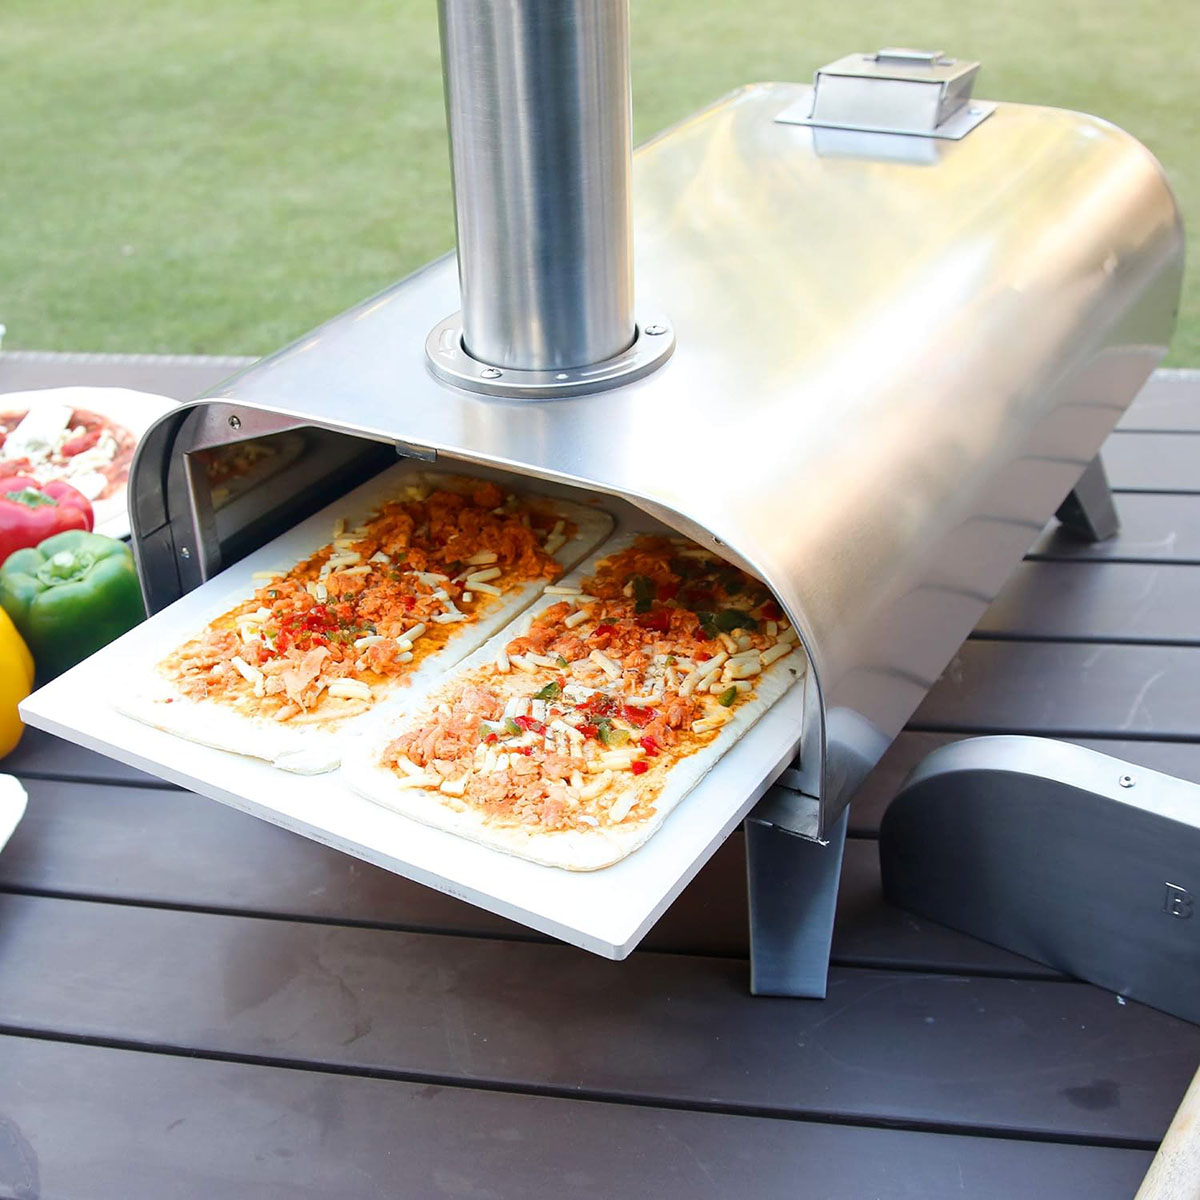 How To Cook Pizza In An Outdoor Pizza Oven